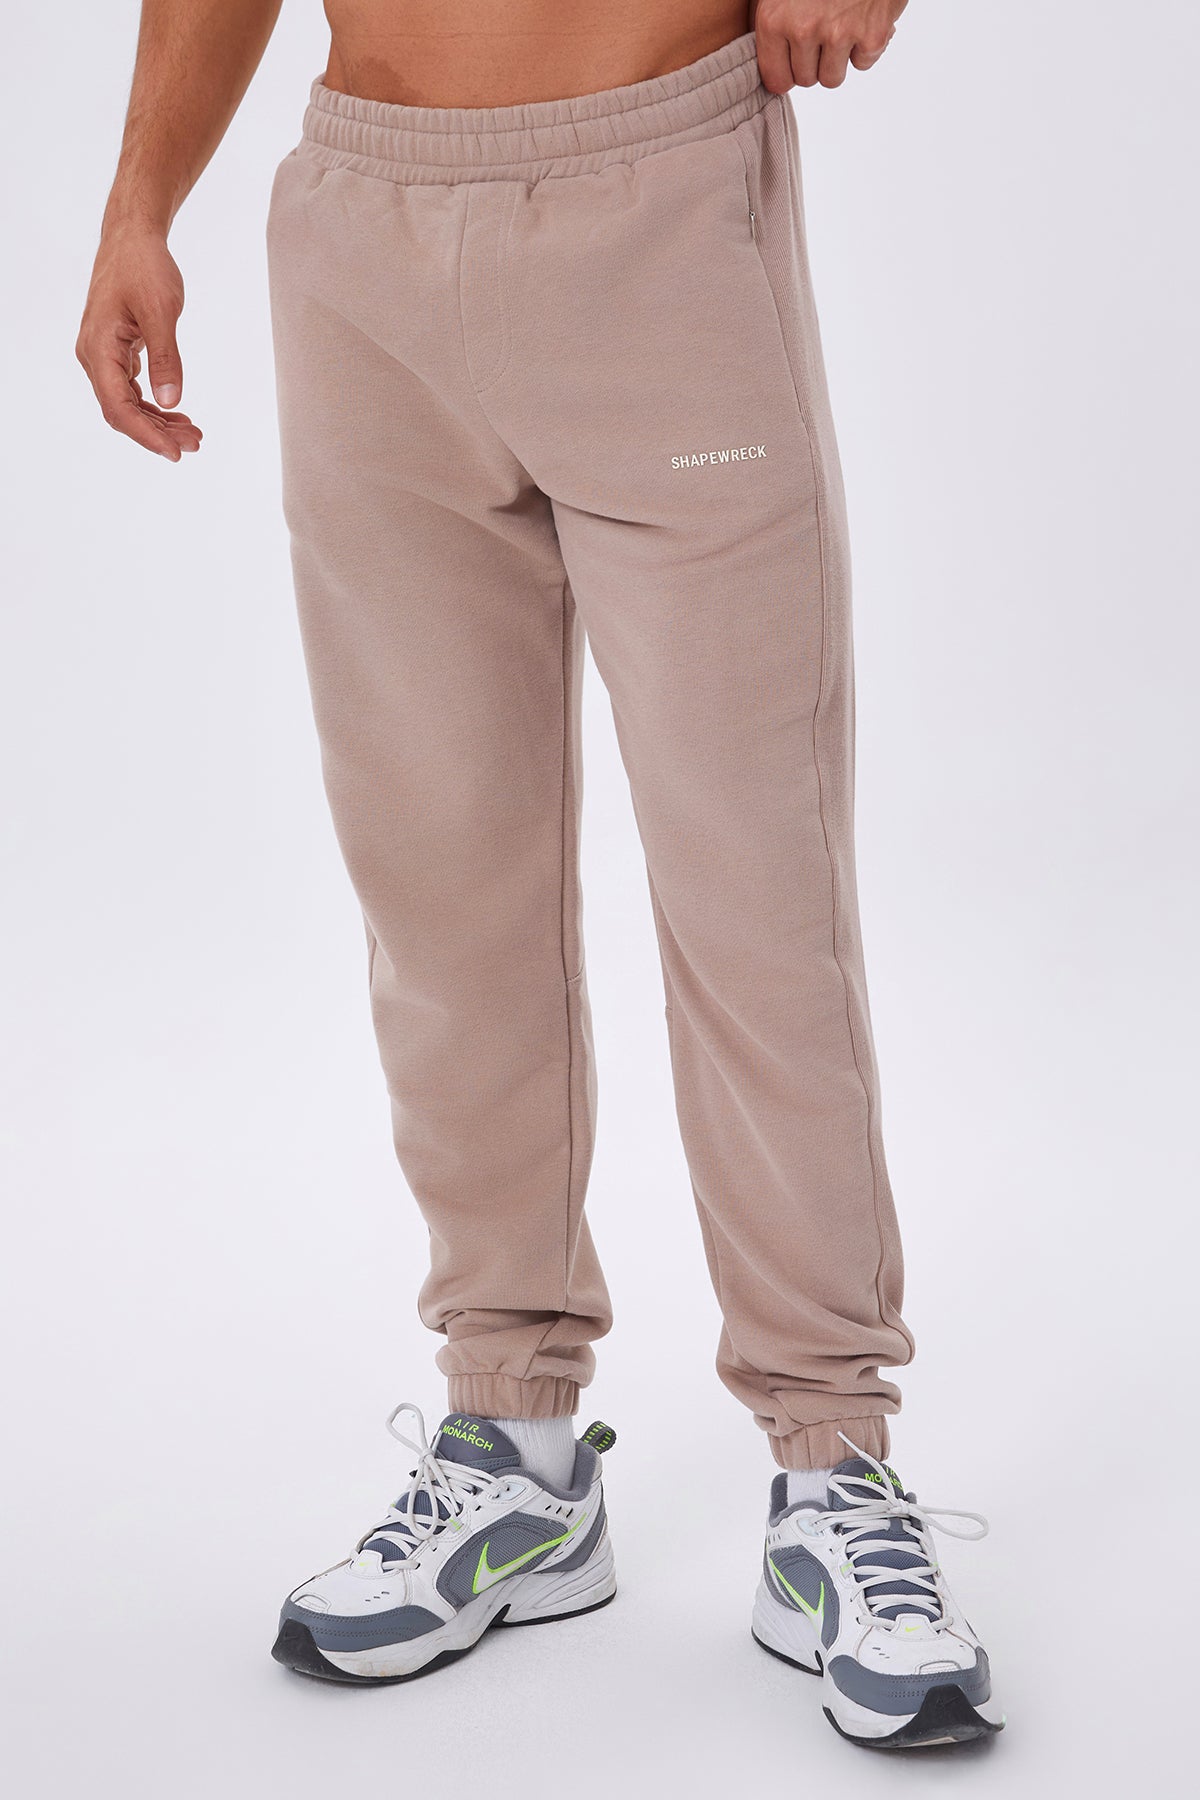 RELAXED FIT Sweatpant PRIMARY JOGGER - BEIGE ROSÉ